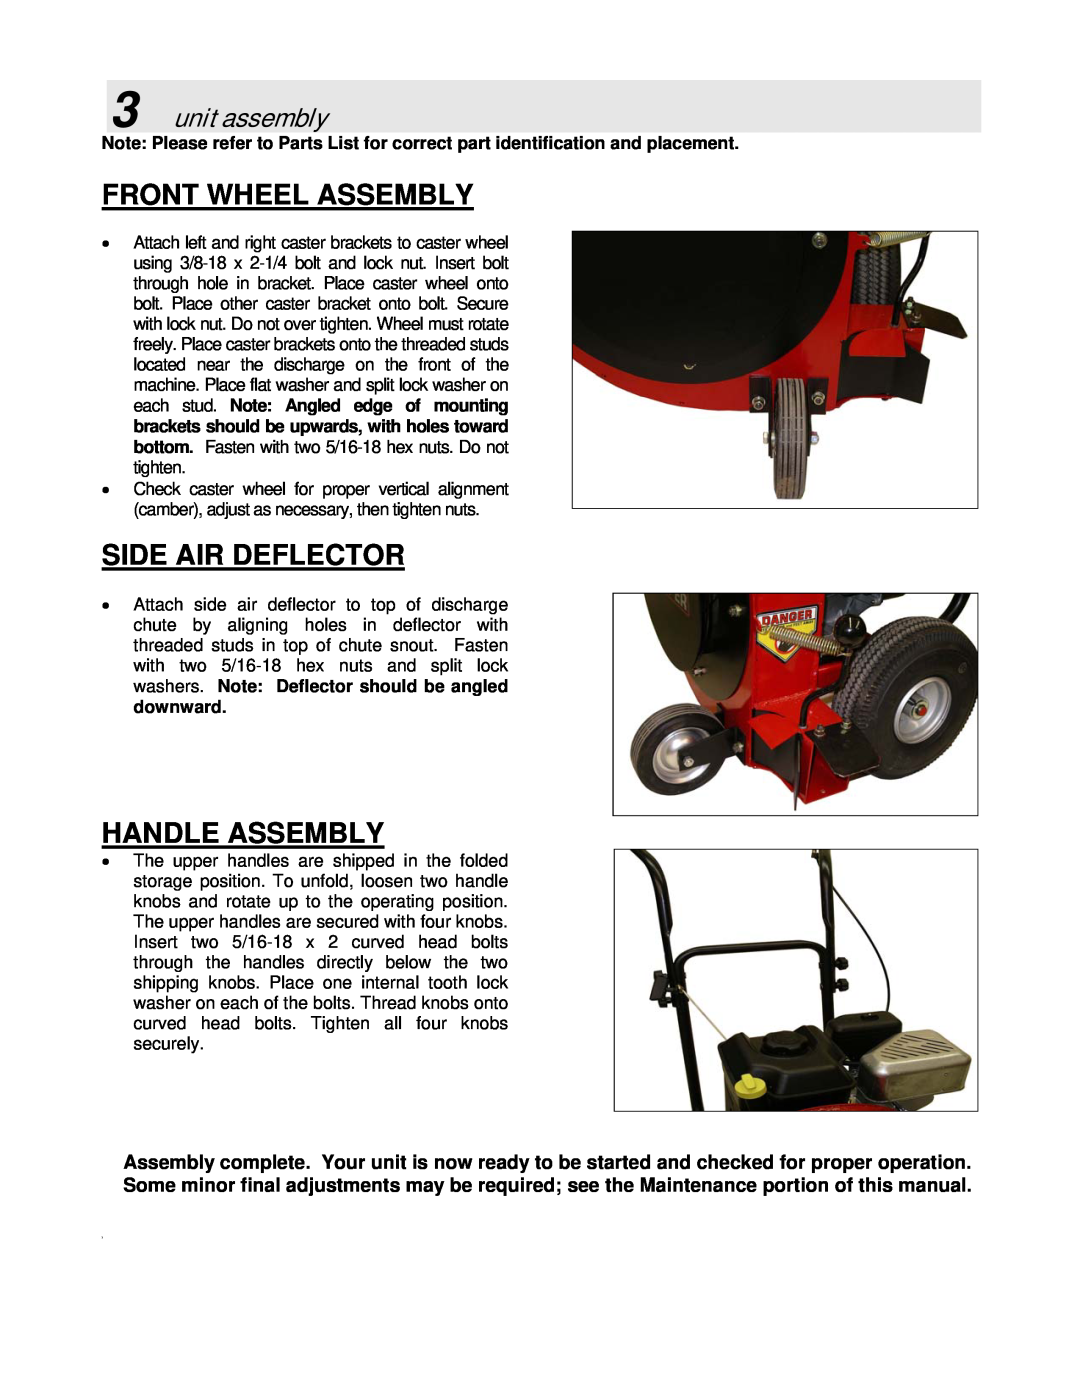 Simplicity LBC6151BV manual Front Wheel Assembly, Side Air Deflector, Handle Assembly, unit assembly 